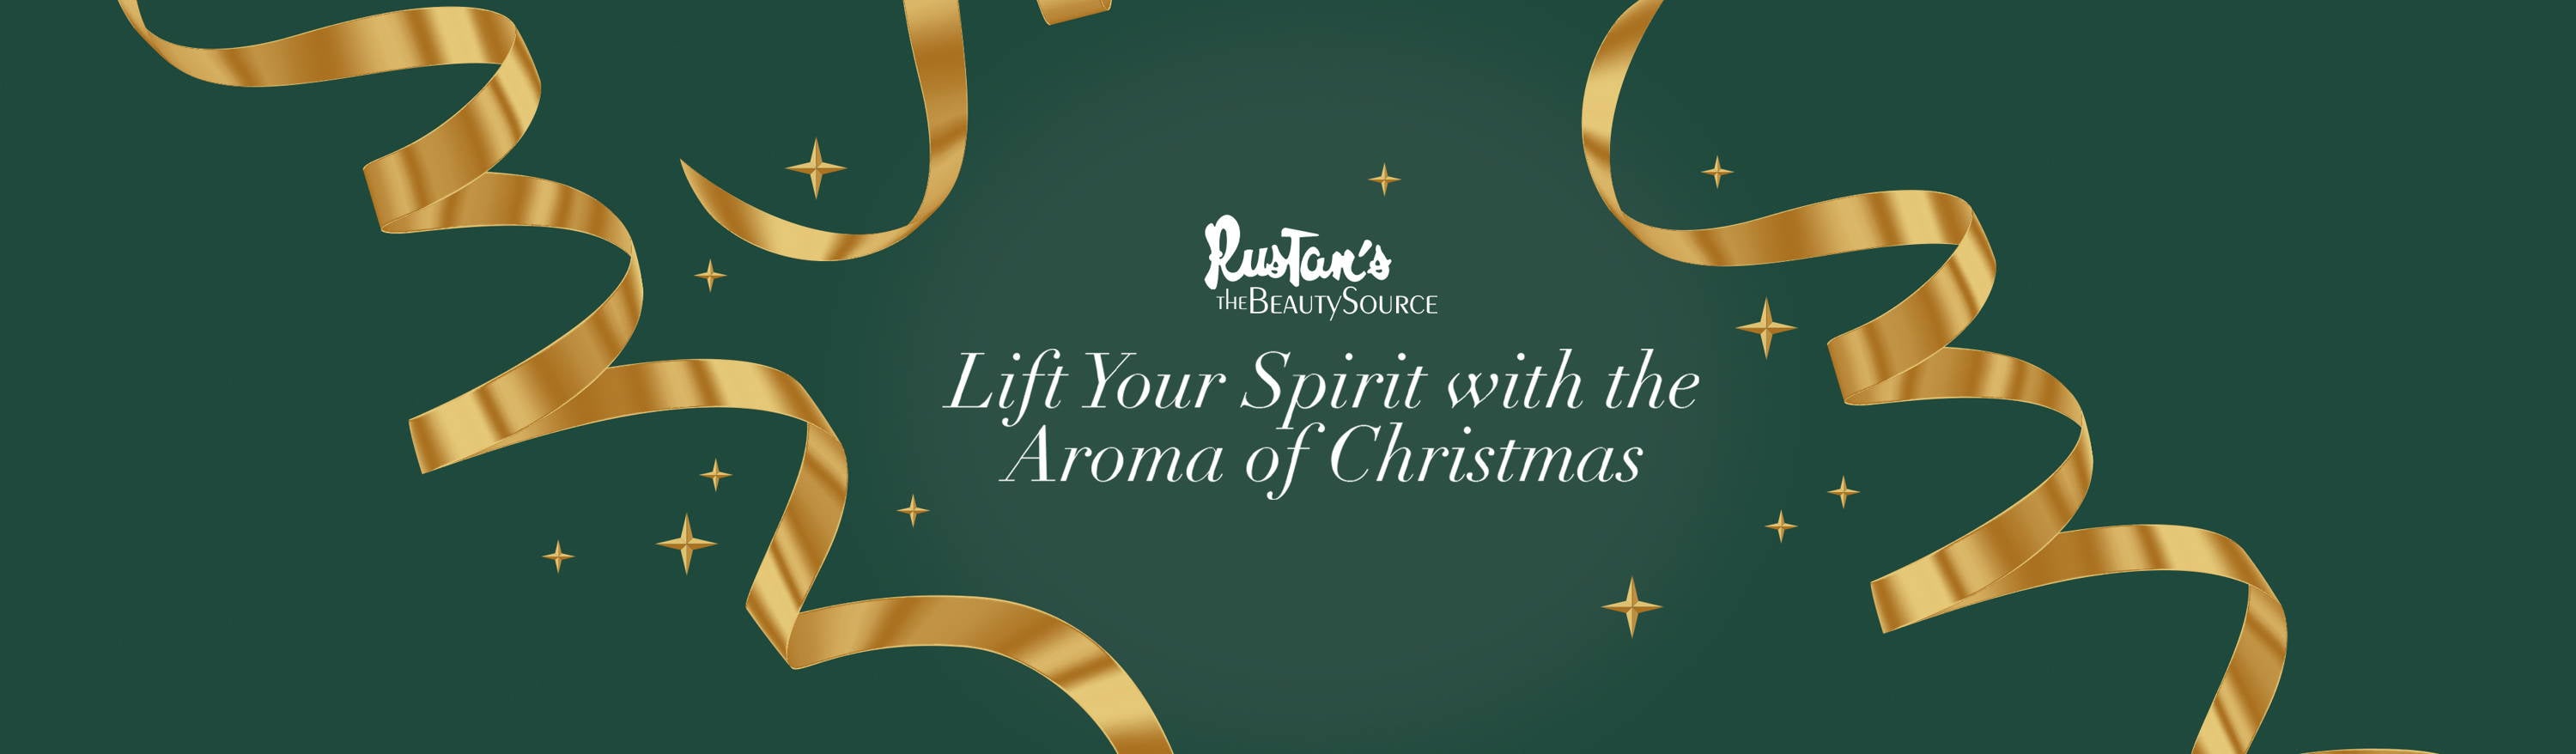 Lift Your Spirit with the Aroma of Christmas